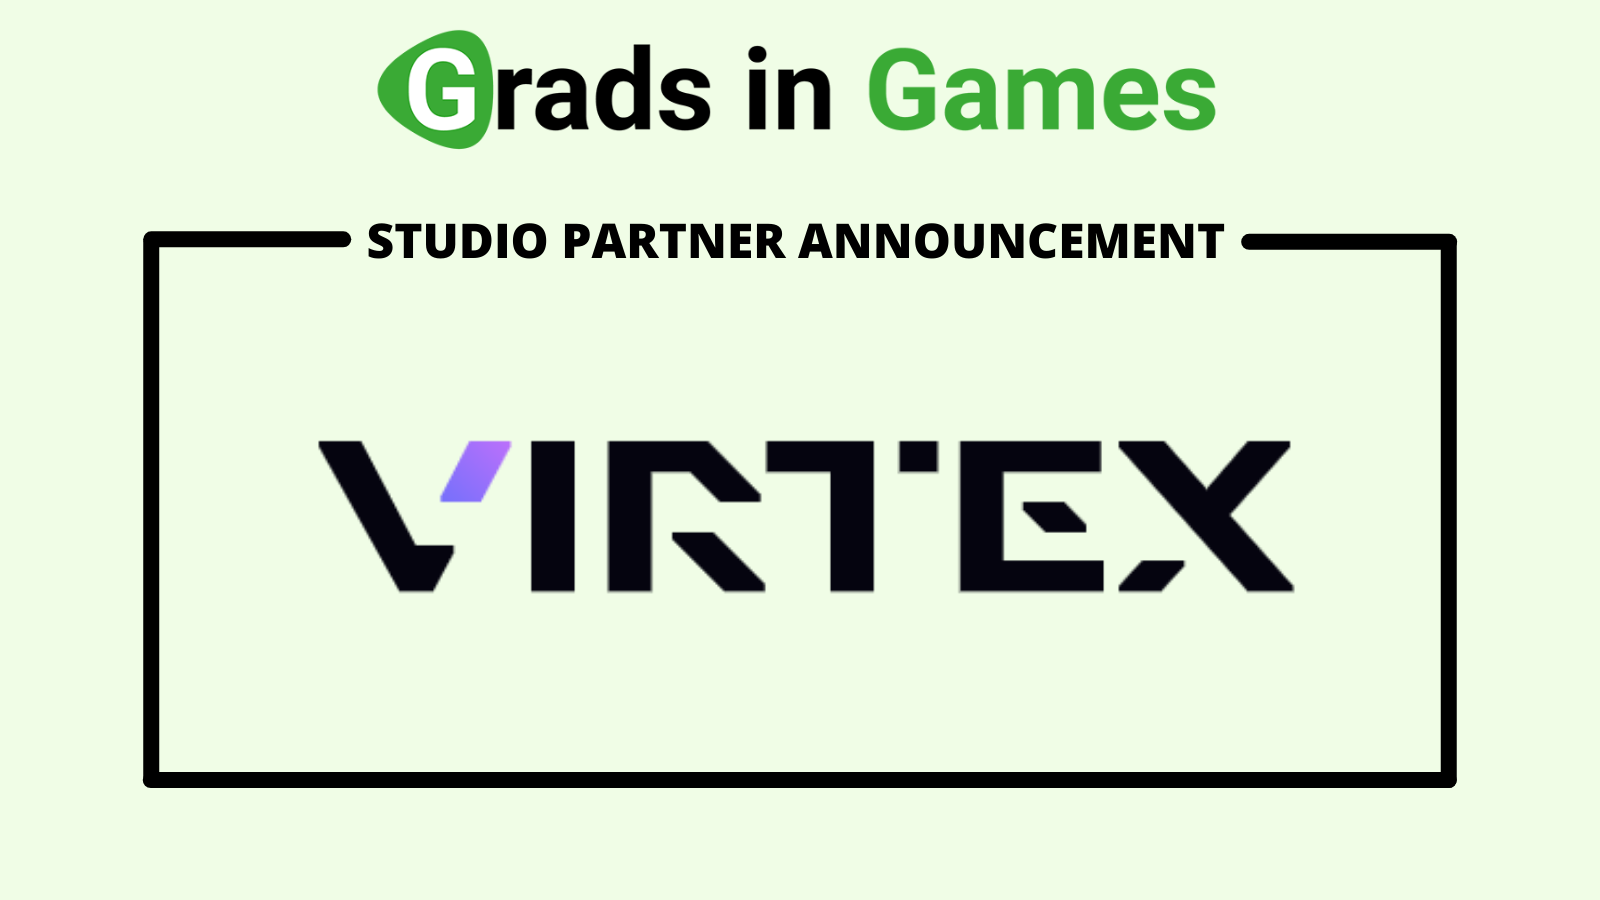 Virtex Entertainment joins as a Grads in Games Partner Studio for 2021/22